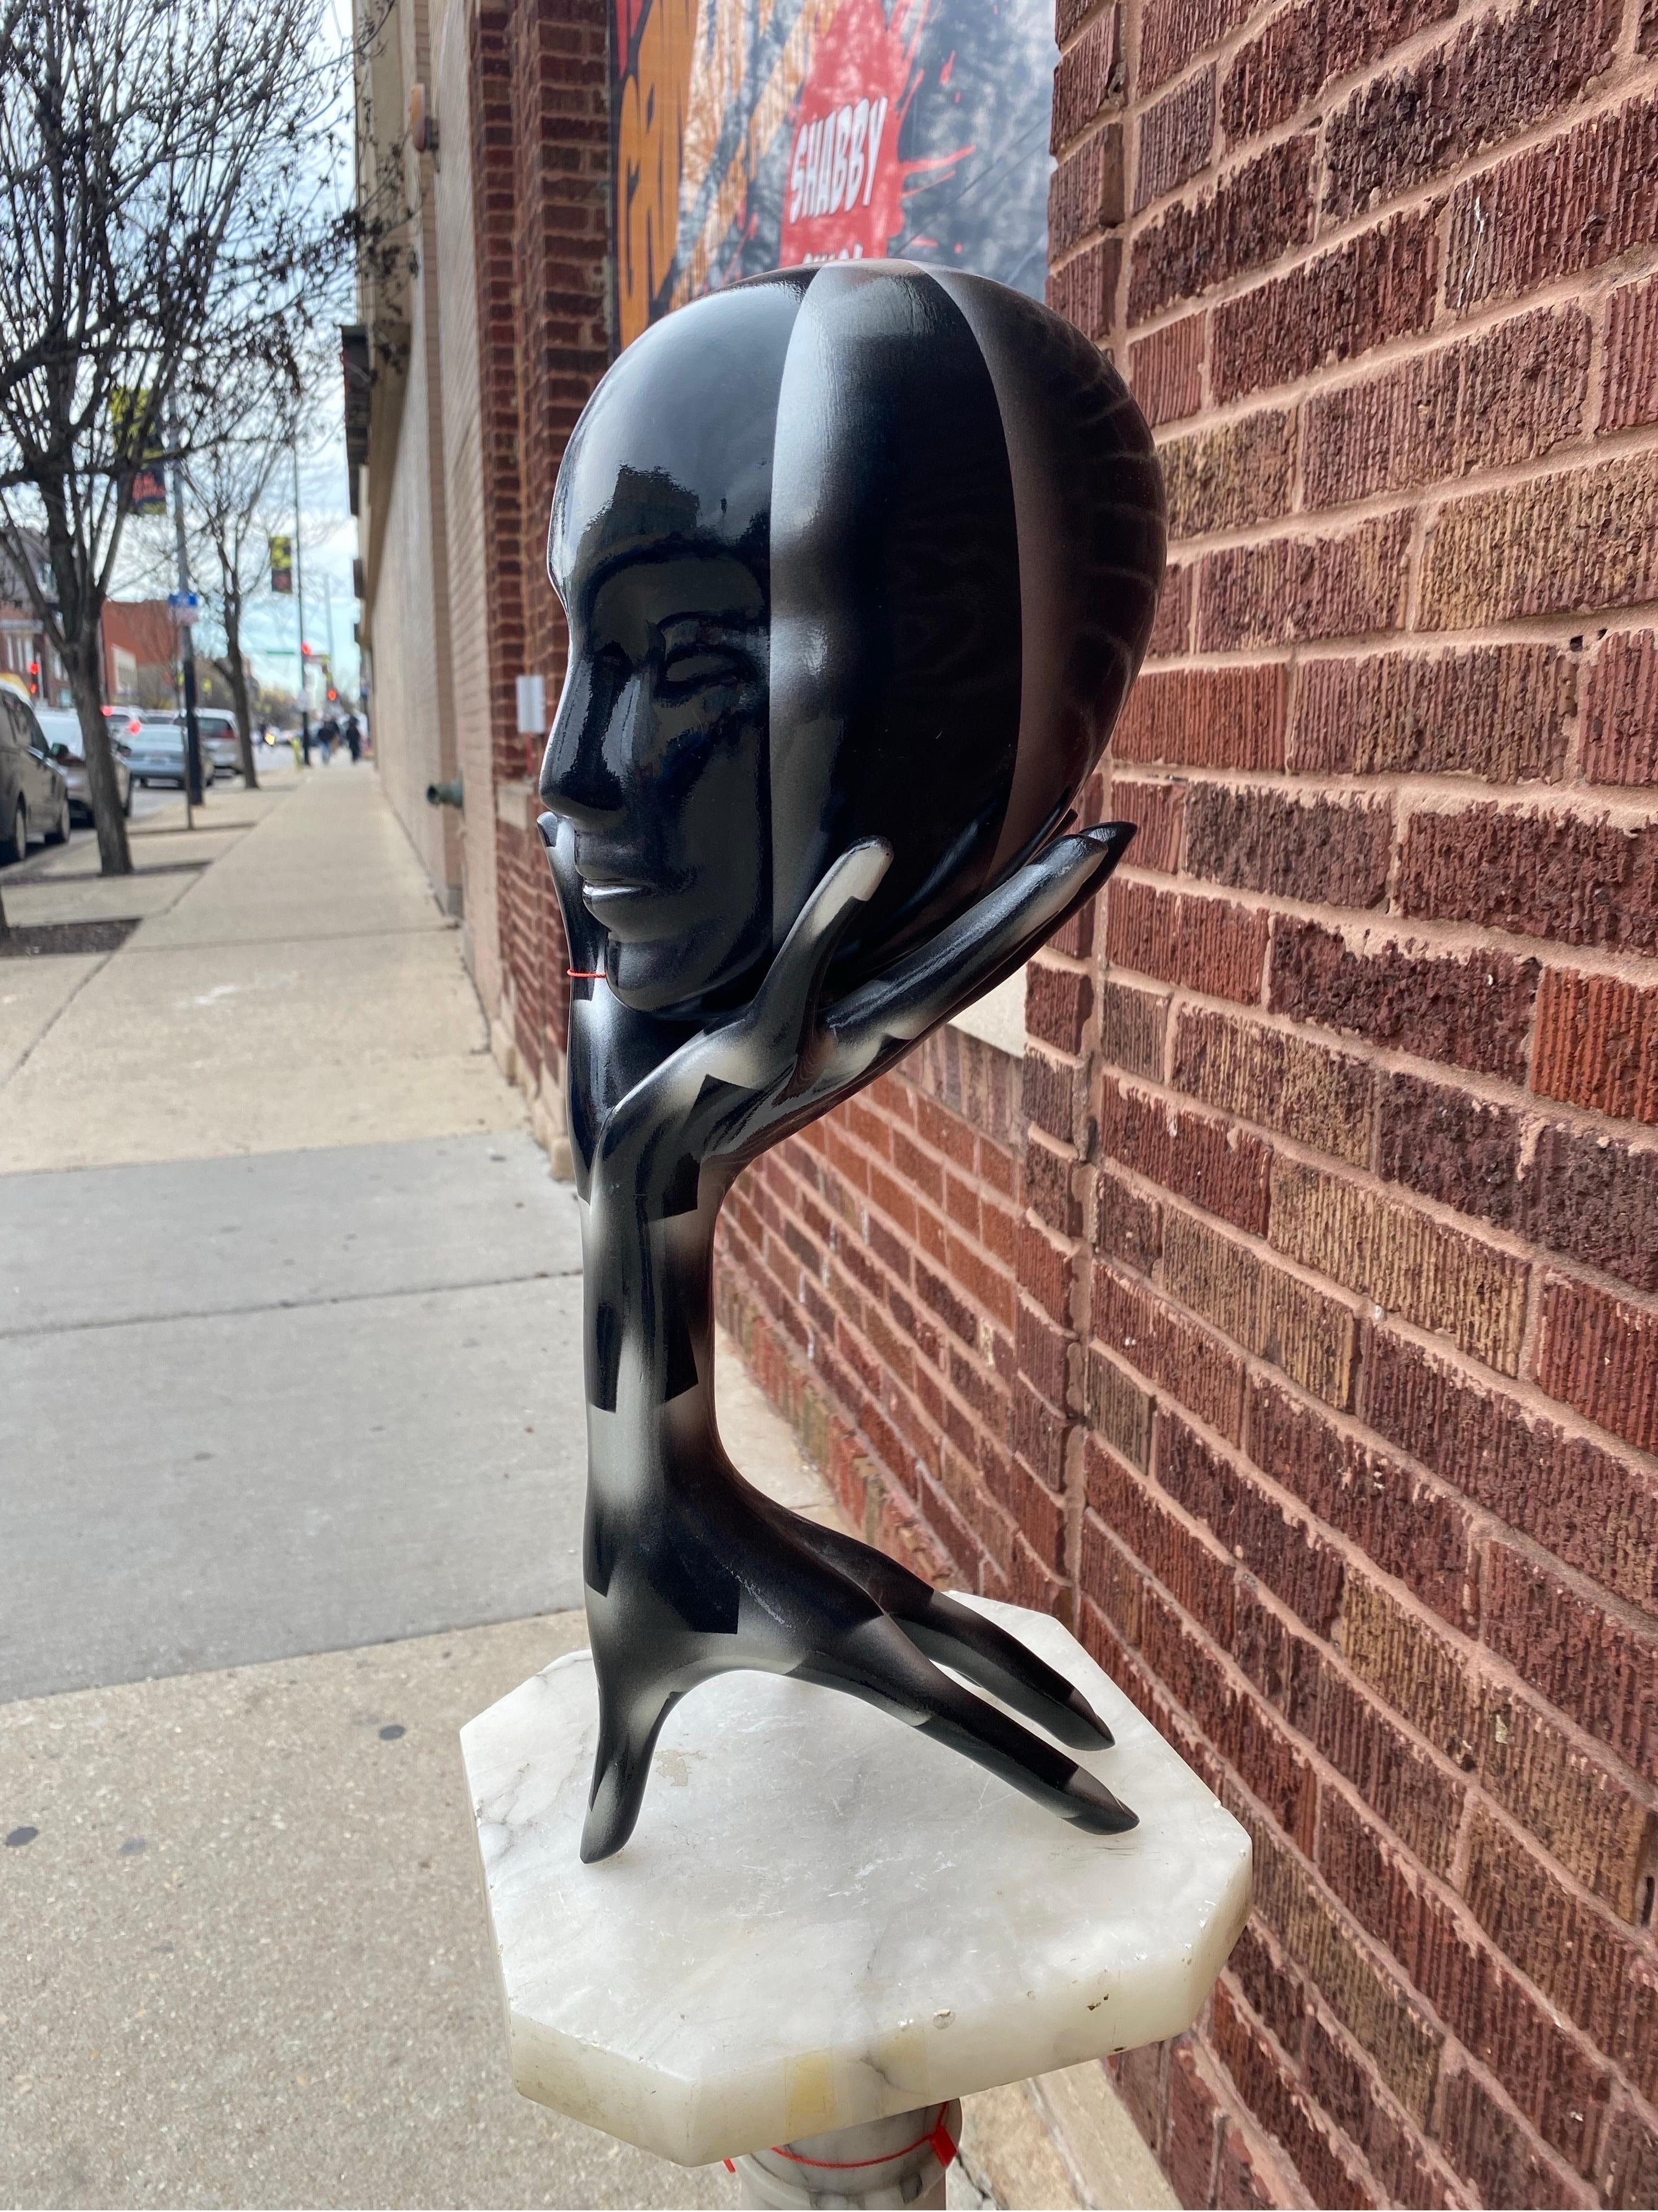 Head-in-Hand 1990s Short Black and Silver Sculpture

This sleek black and sliver painted wood sculpture depicts an arm with a stretched out hand on either end. A head balances on the hand’s fingertips. The head is firmly attached to the hand. This